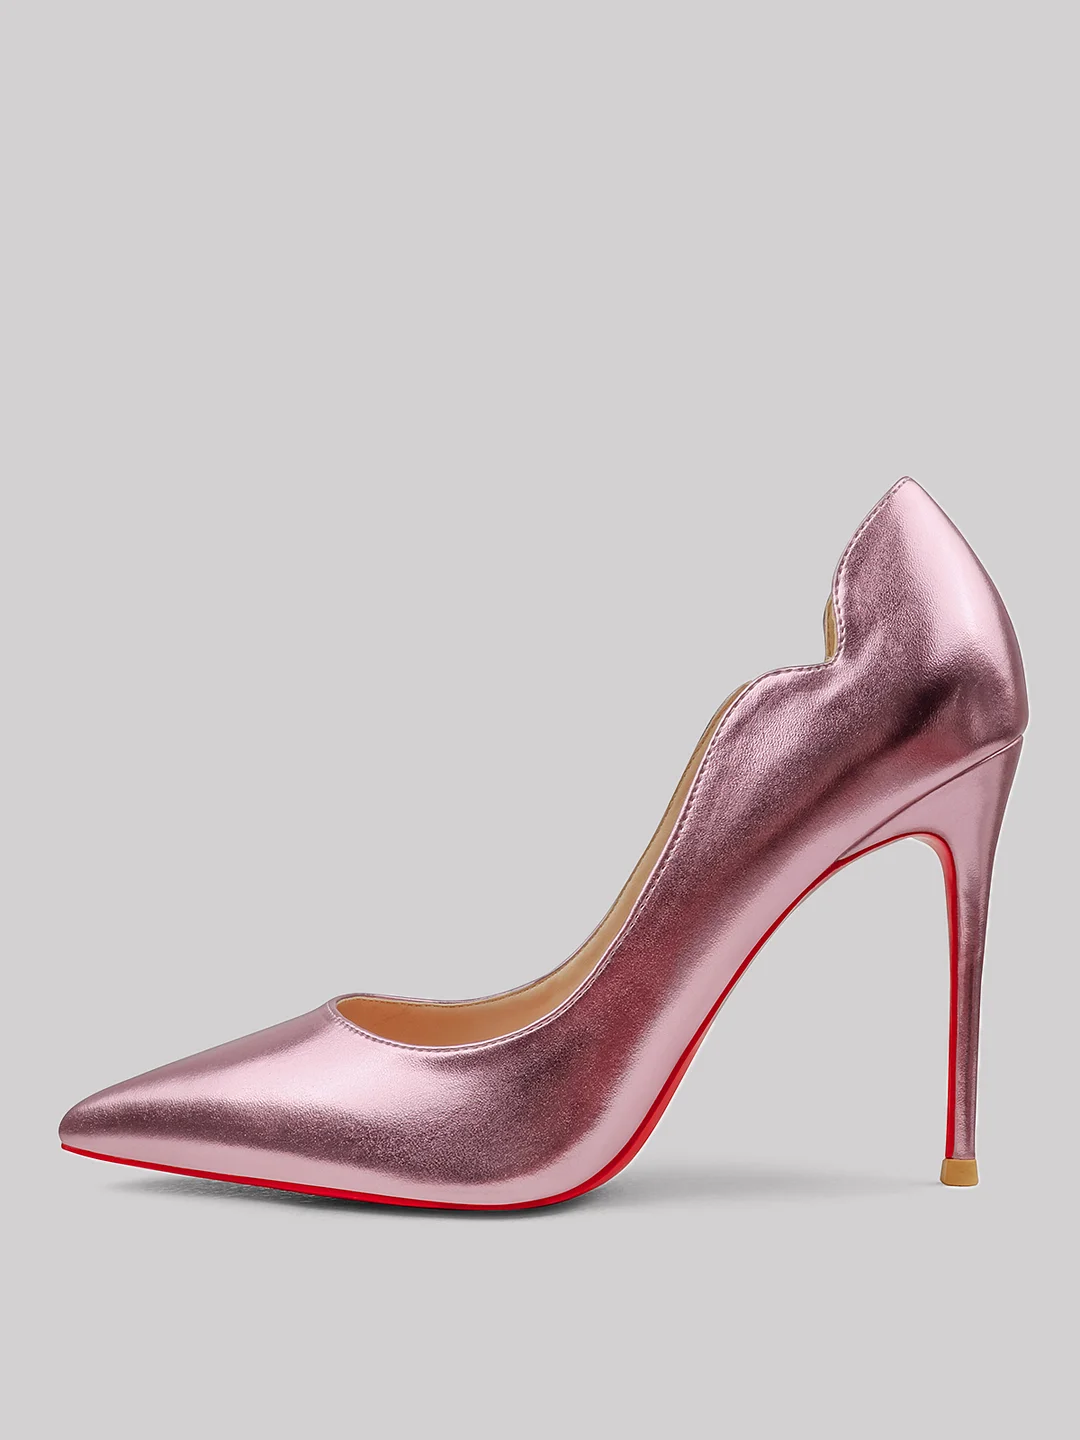 3.94"/4.72" Women's Classic Pointed Toe Red Bottom High Heels for Party Wedding Pumps Matte Shoes